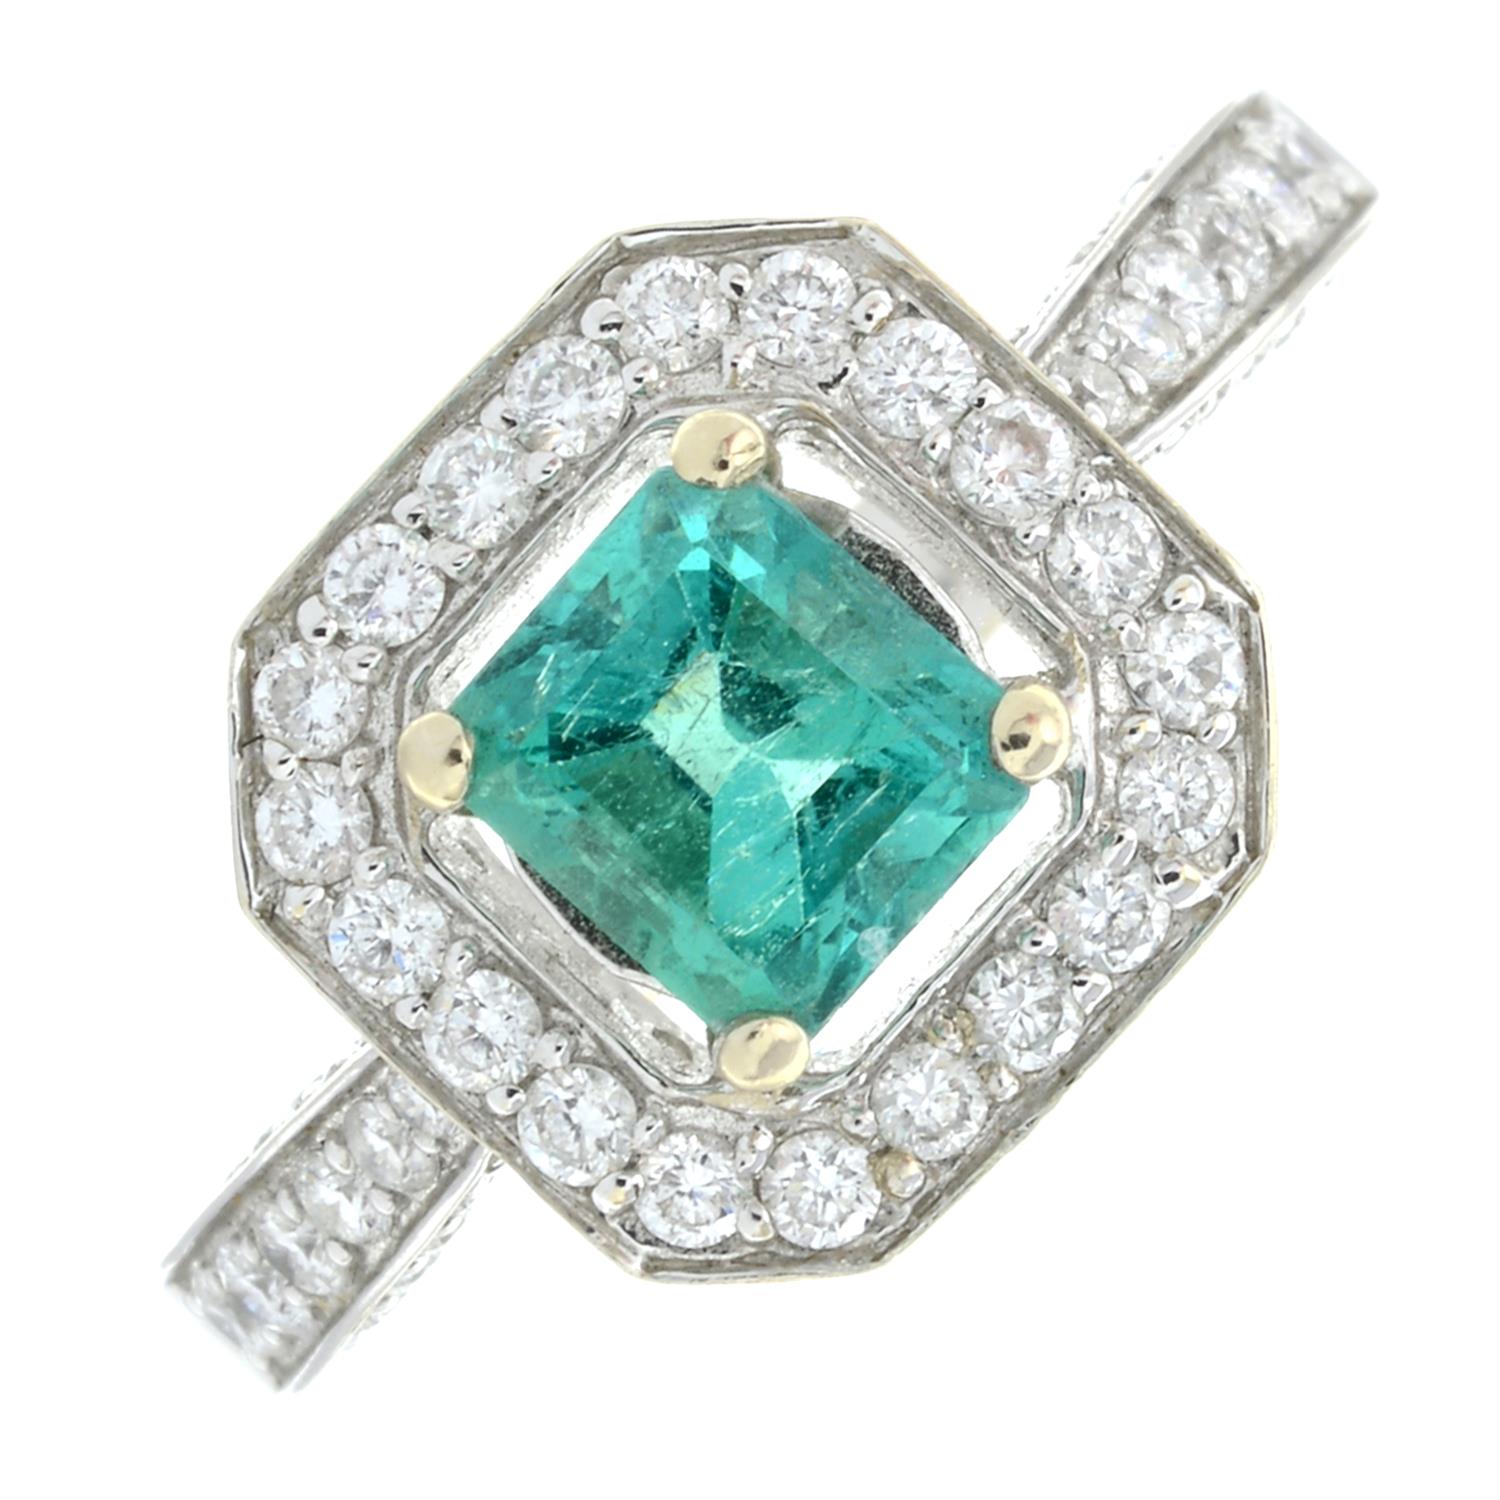 An 18ct gold emerald and brilliant-cut diamond cluster ring, with pavé-set diamond shoulders.